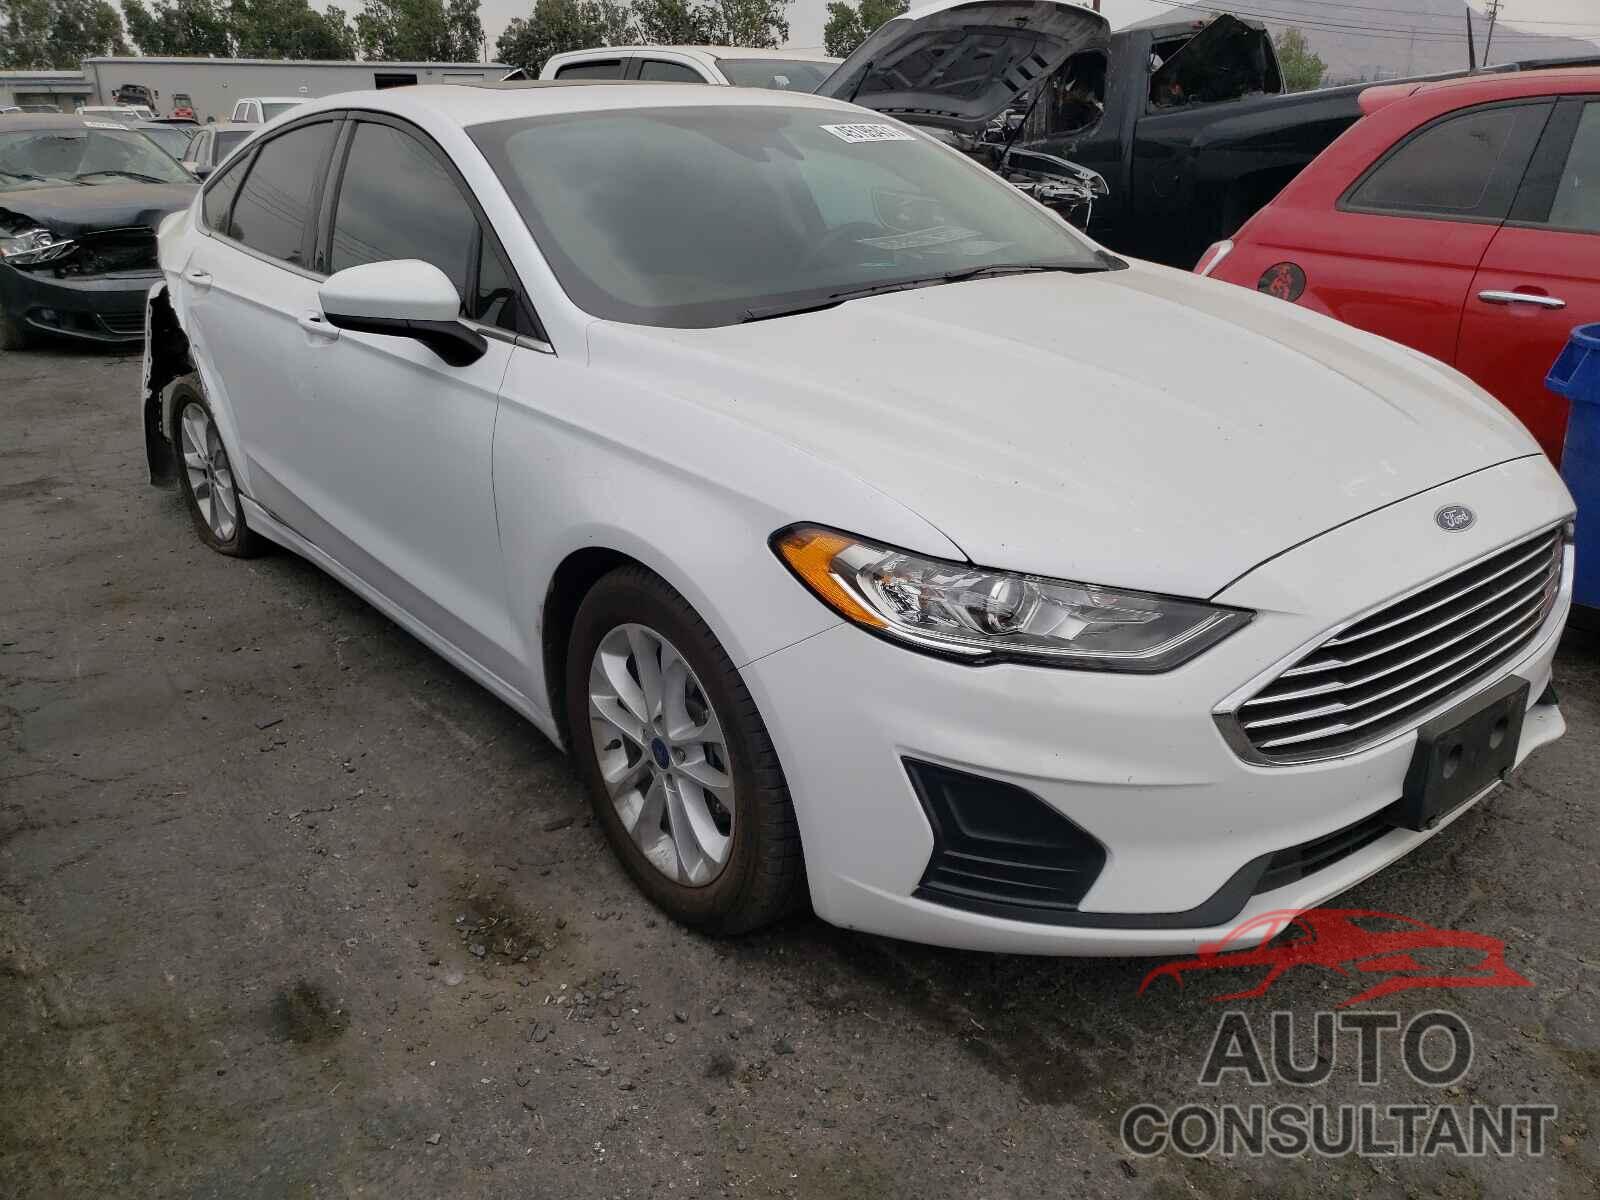 2020 FUSION FORD